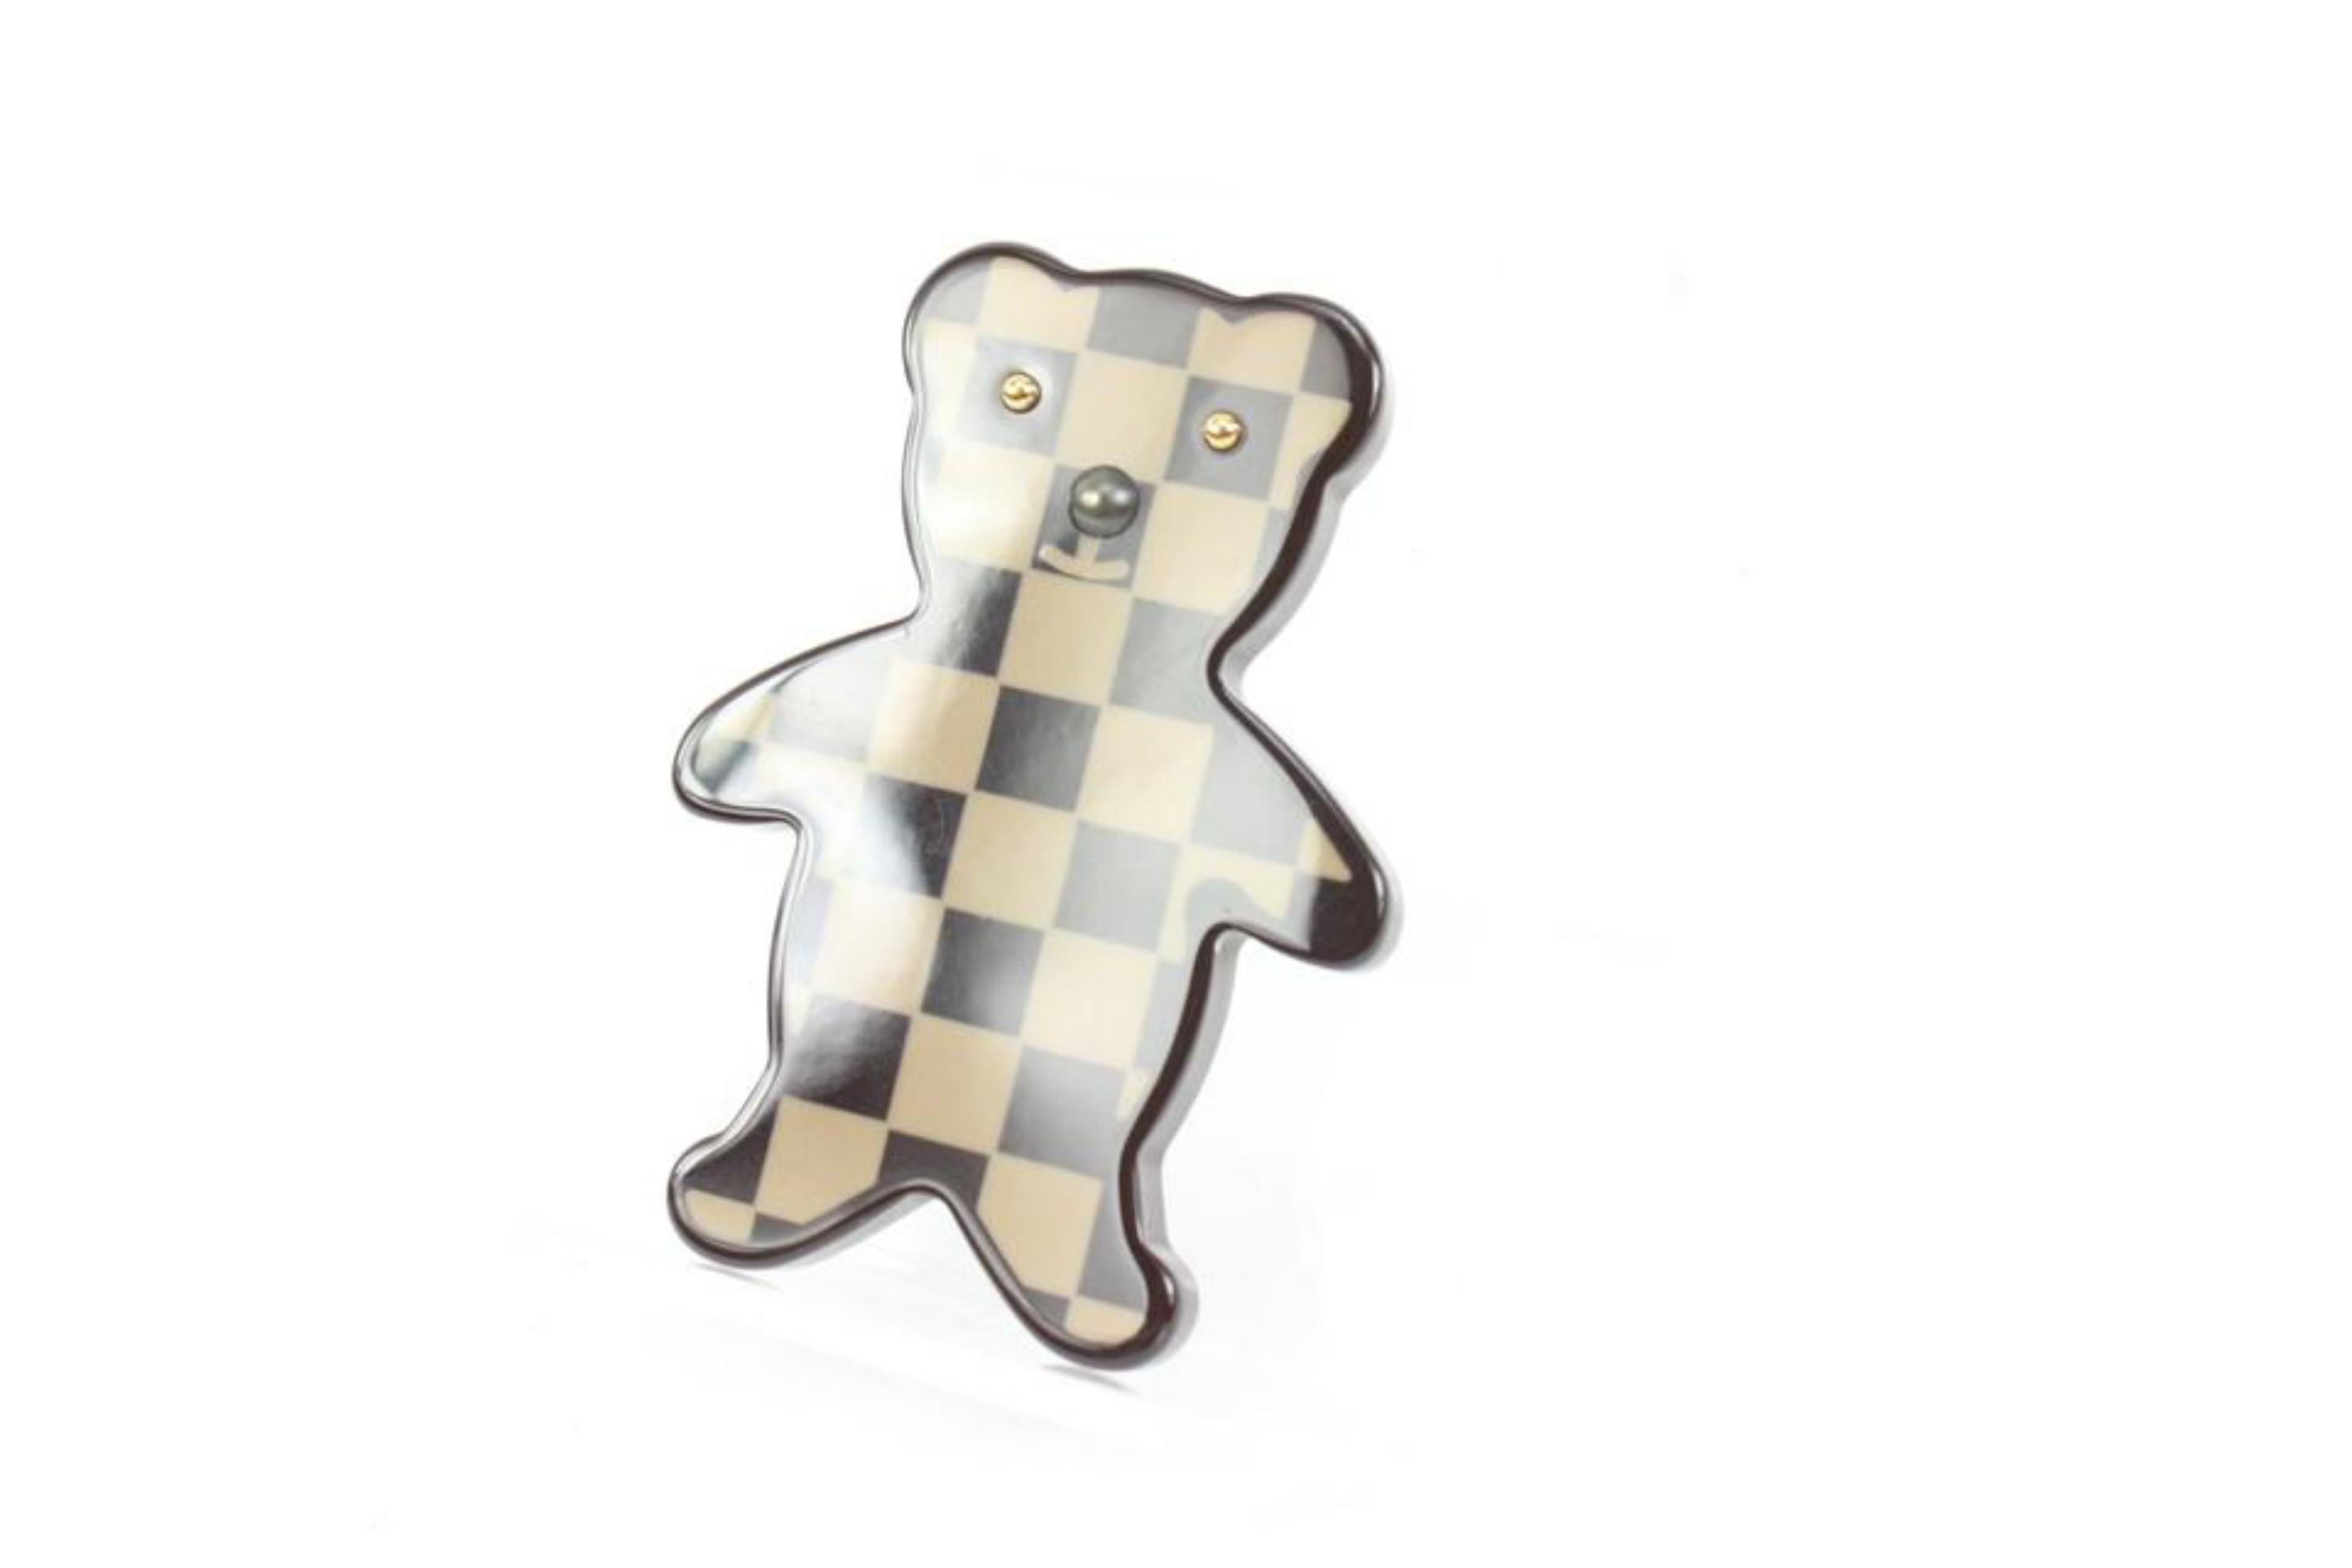 Louis Vuitton 2005 Damier Ebene Teddy Bear Pin Broochs 331lk43 In Good Condition For Sale In Dix hills, NY